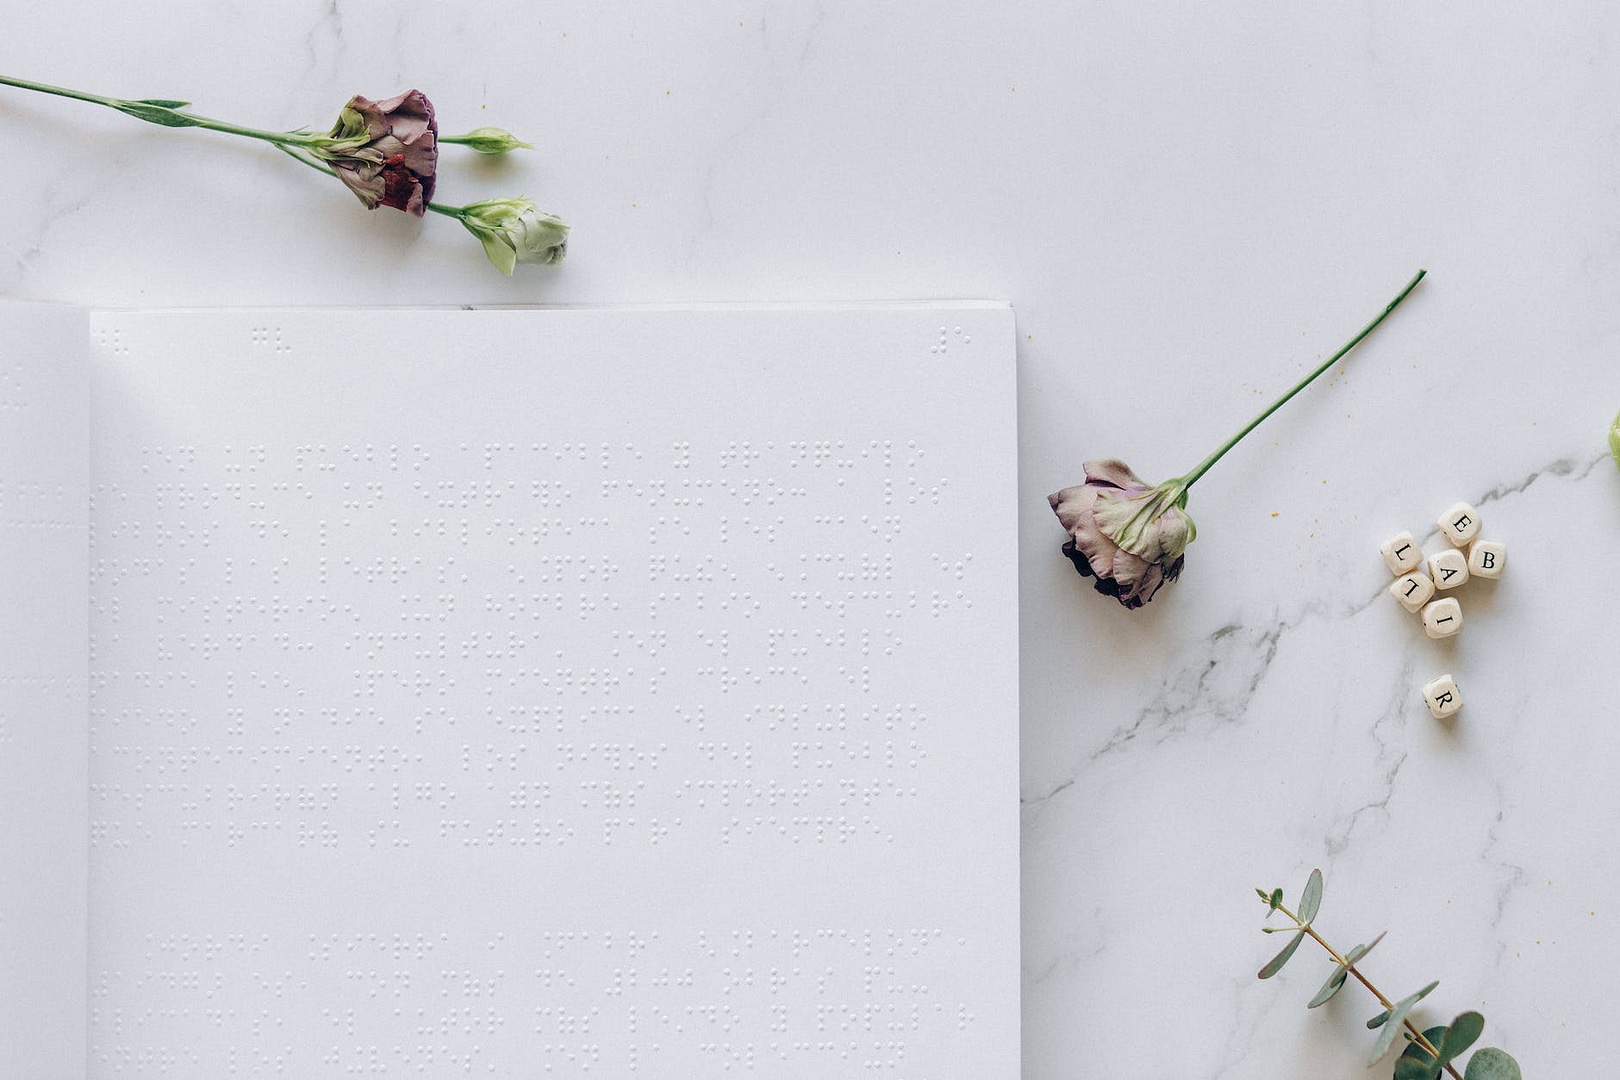 a braille book and dry flowers on the table